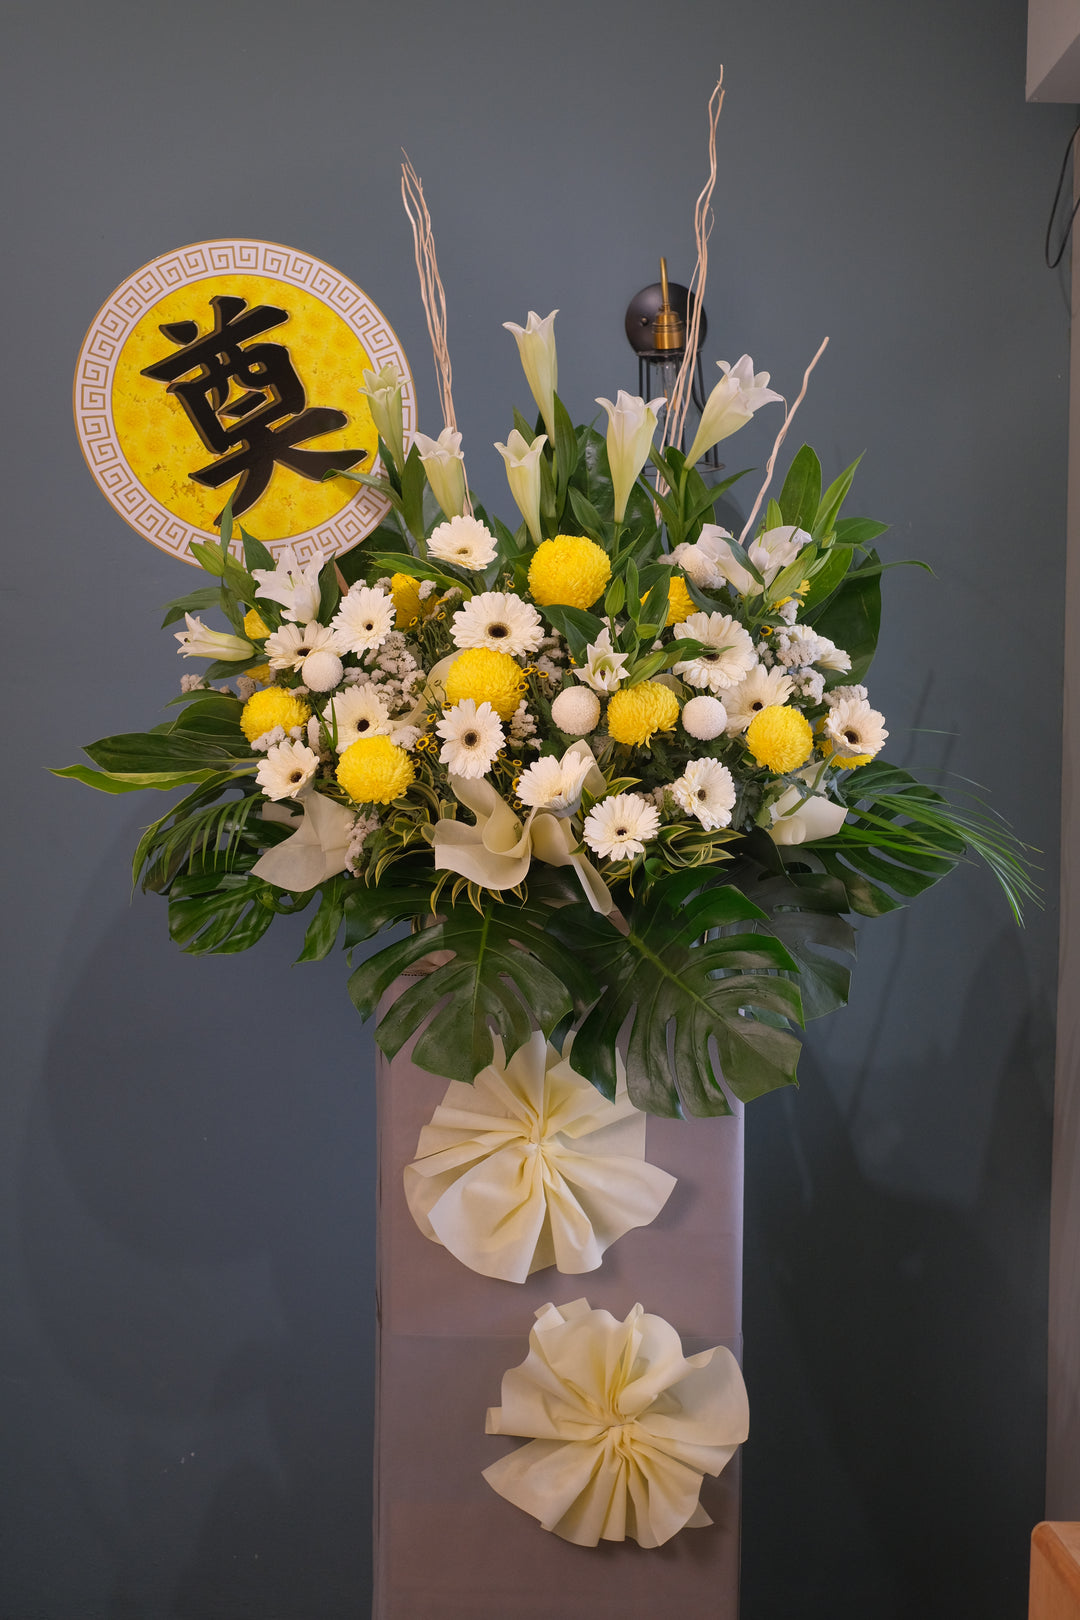 Composed with lilies, chrysanthemums, daisies and fillers to express condolences and heartfelt sympathies. For same day condolences flowers delivery in Butterworth